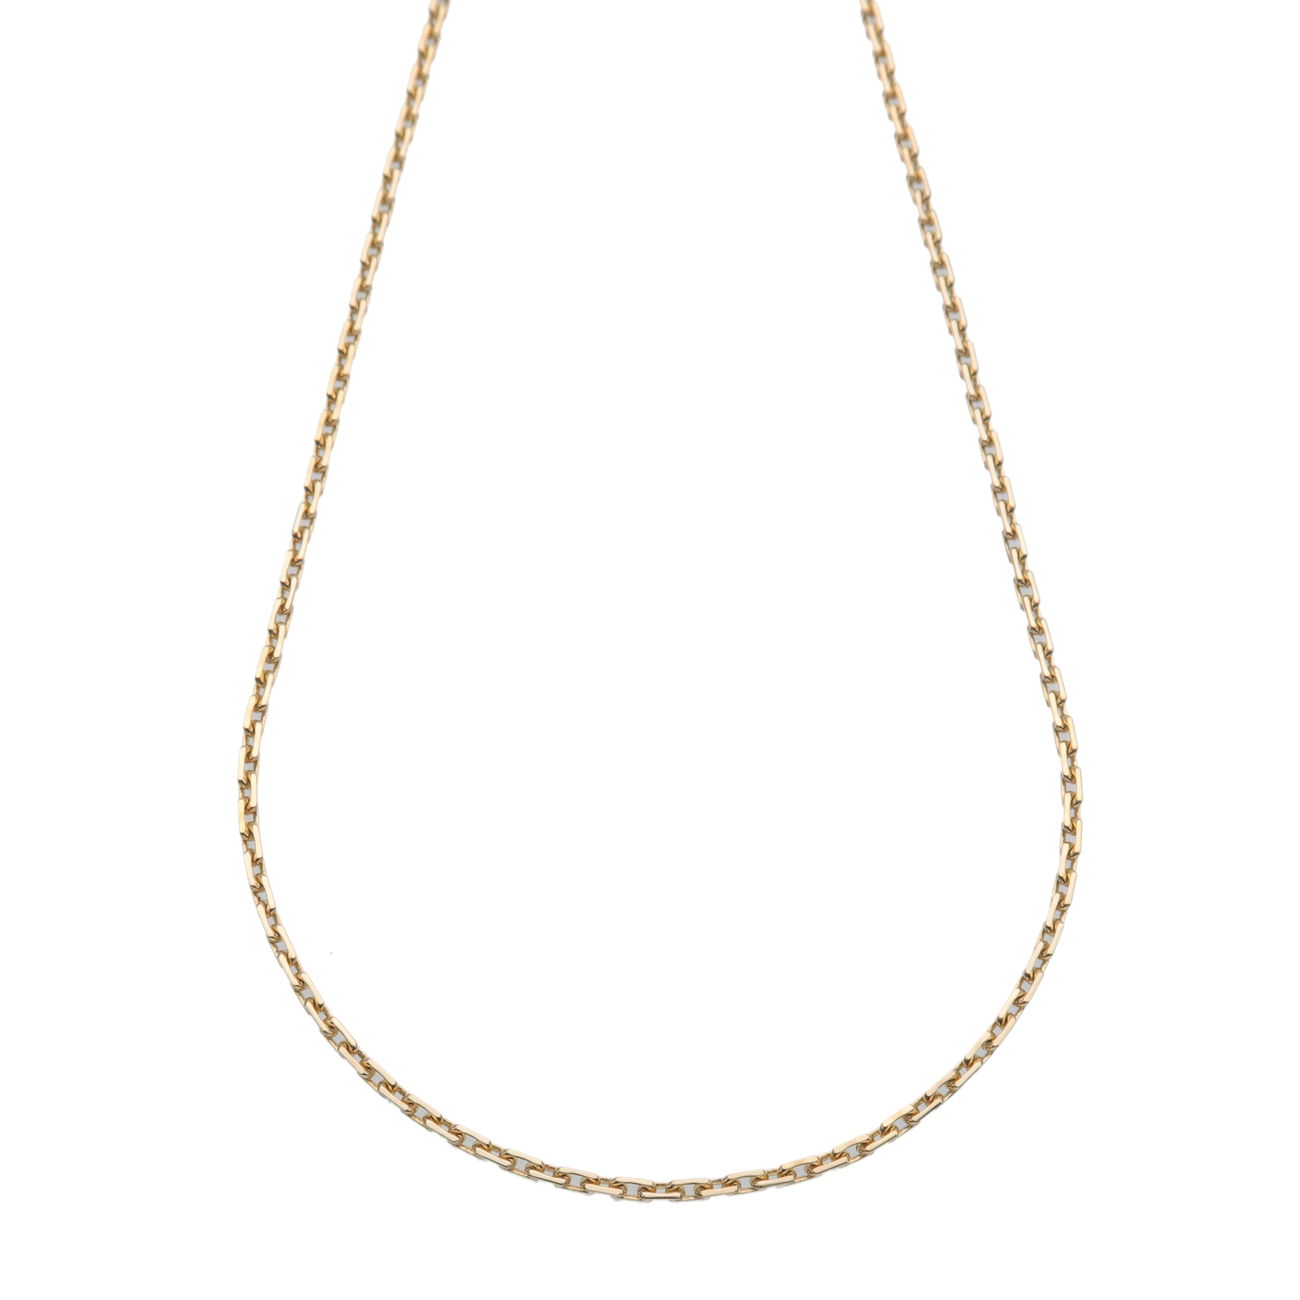 Cartier-Link-Slave-Chain-Necklace-K18YG-750YG-Yellow-Gold